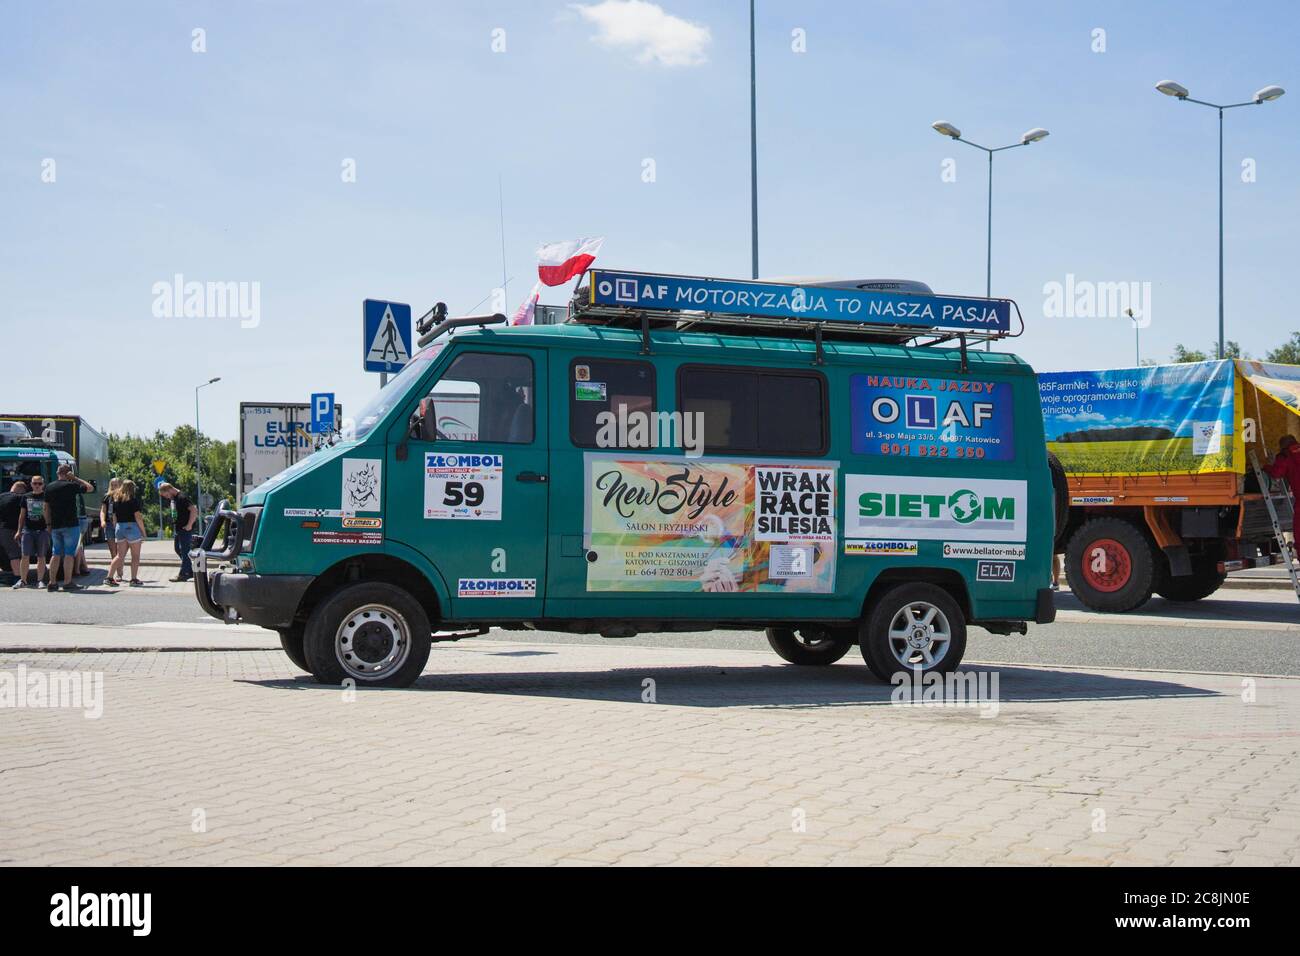 LEśNICA, POLAND - Jun 29, 2019: The first edition of Zombol took place in 2007. The charity rally was created by a few friends, and its aim is to trav Stock Photo